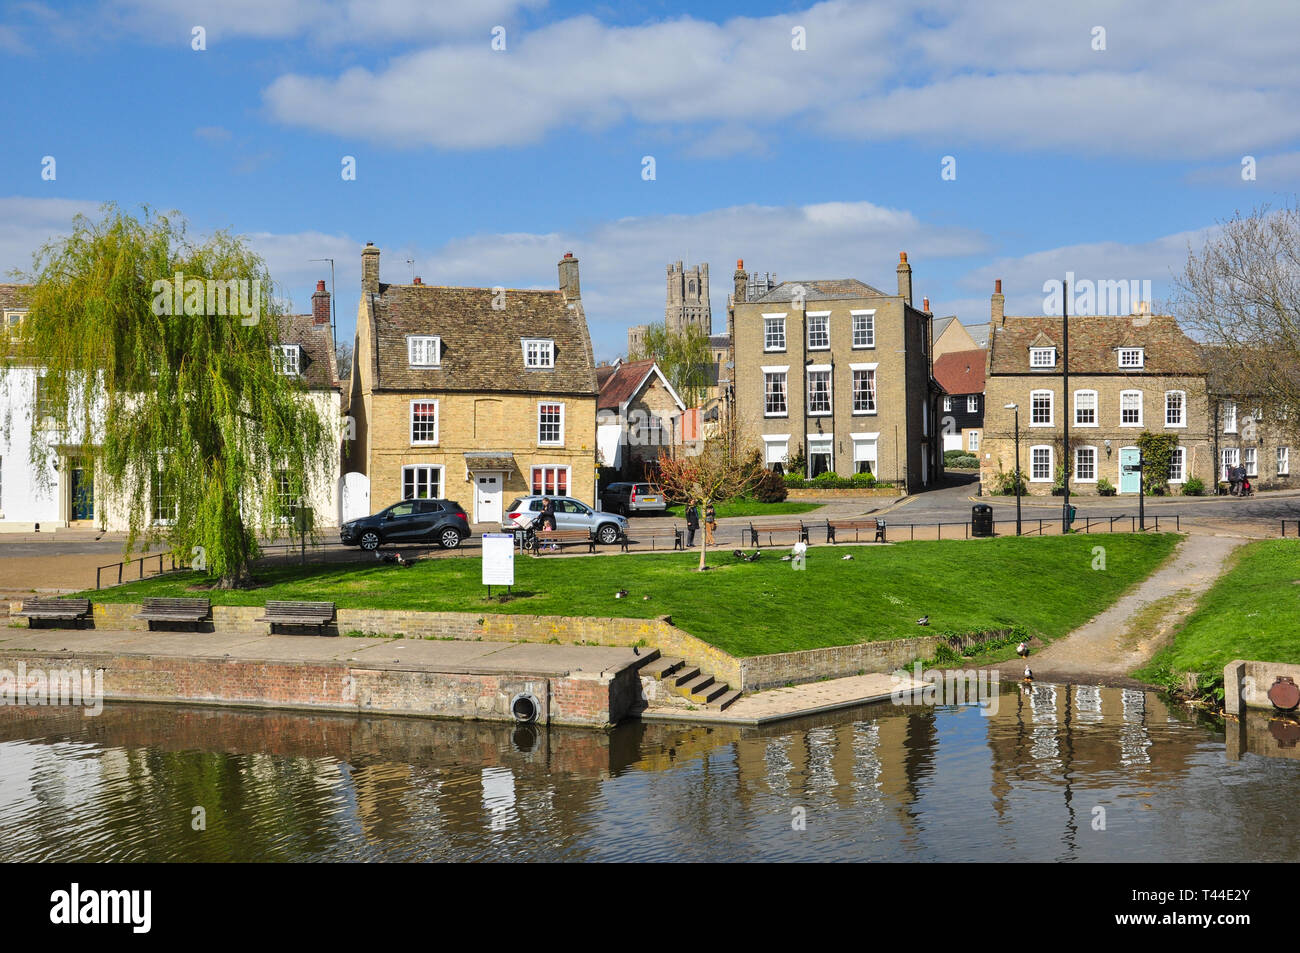 Slipway and Qyayside buildings by the River Great Ouse, Ely, Cambridgeshire, England, UK Stock Photo